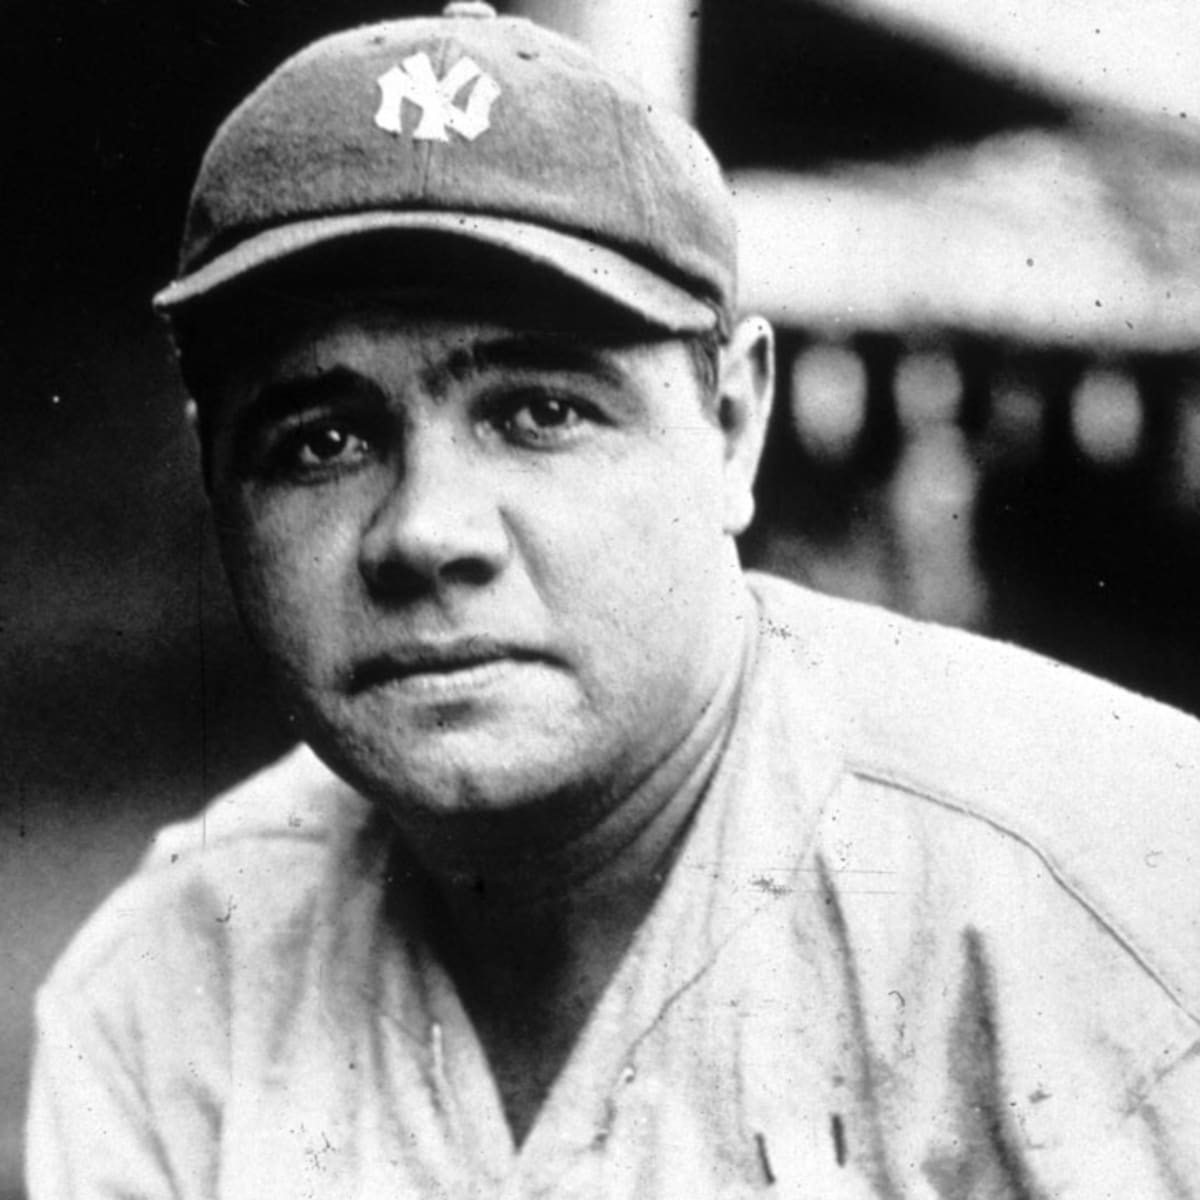 Babe Ruth jersey sells for record $4.4 million - The San Diego